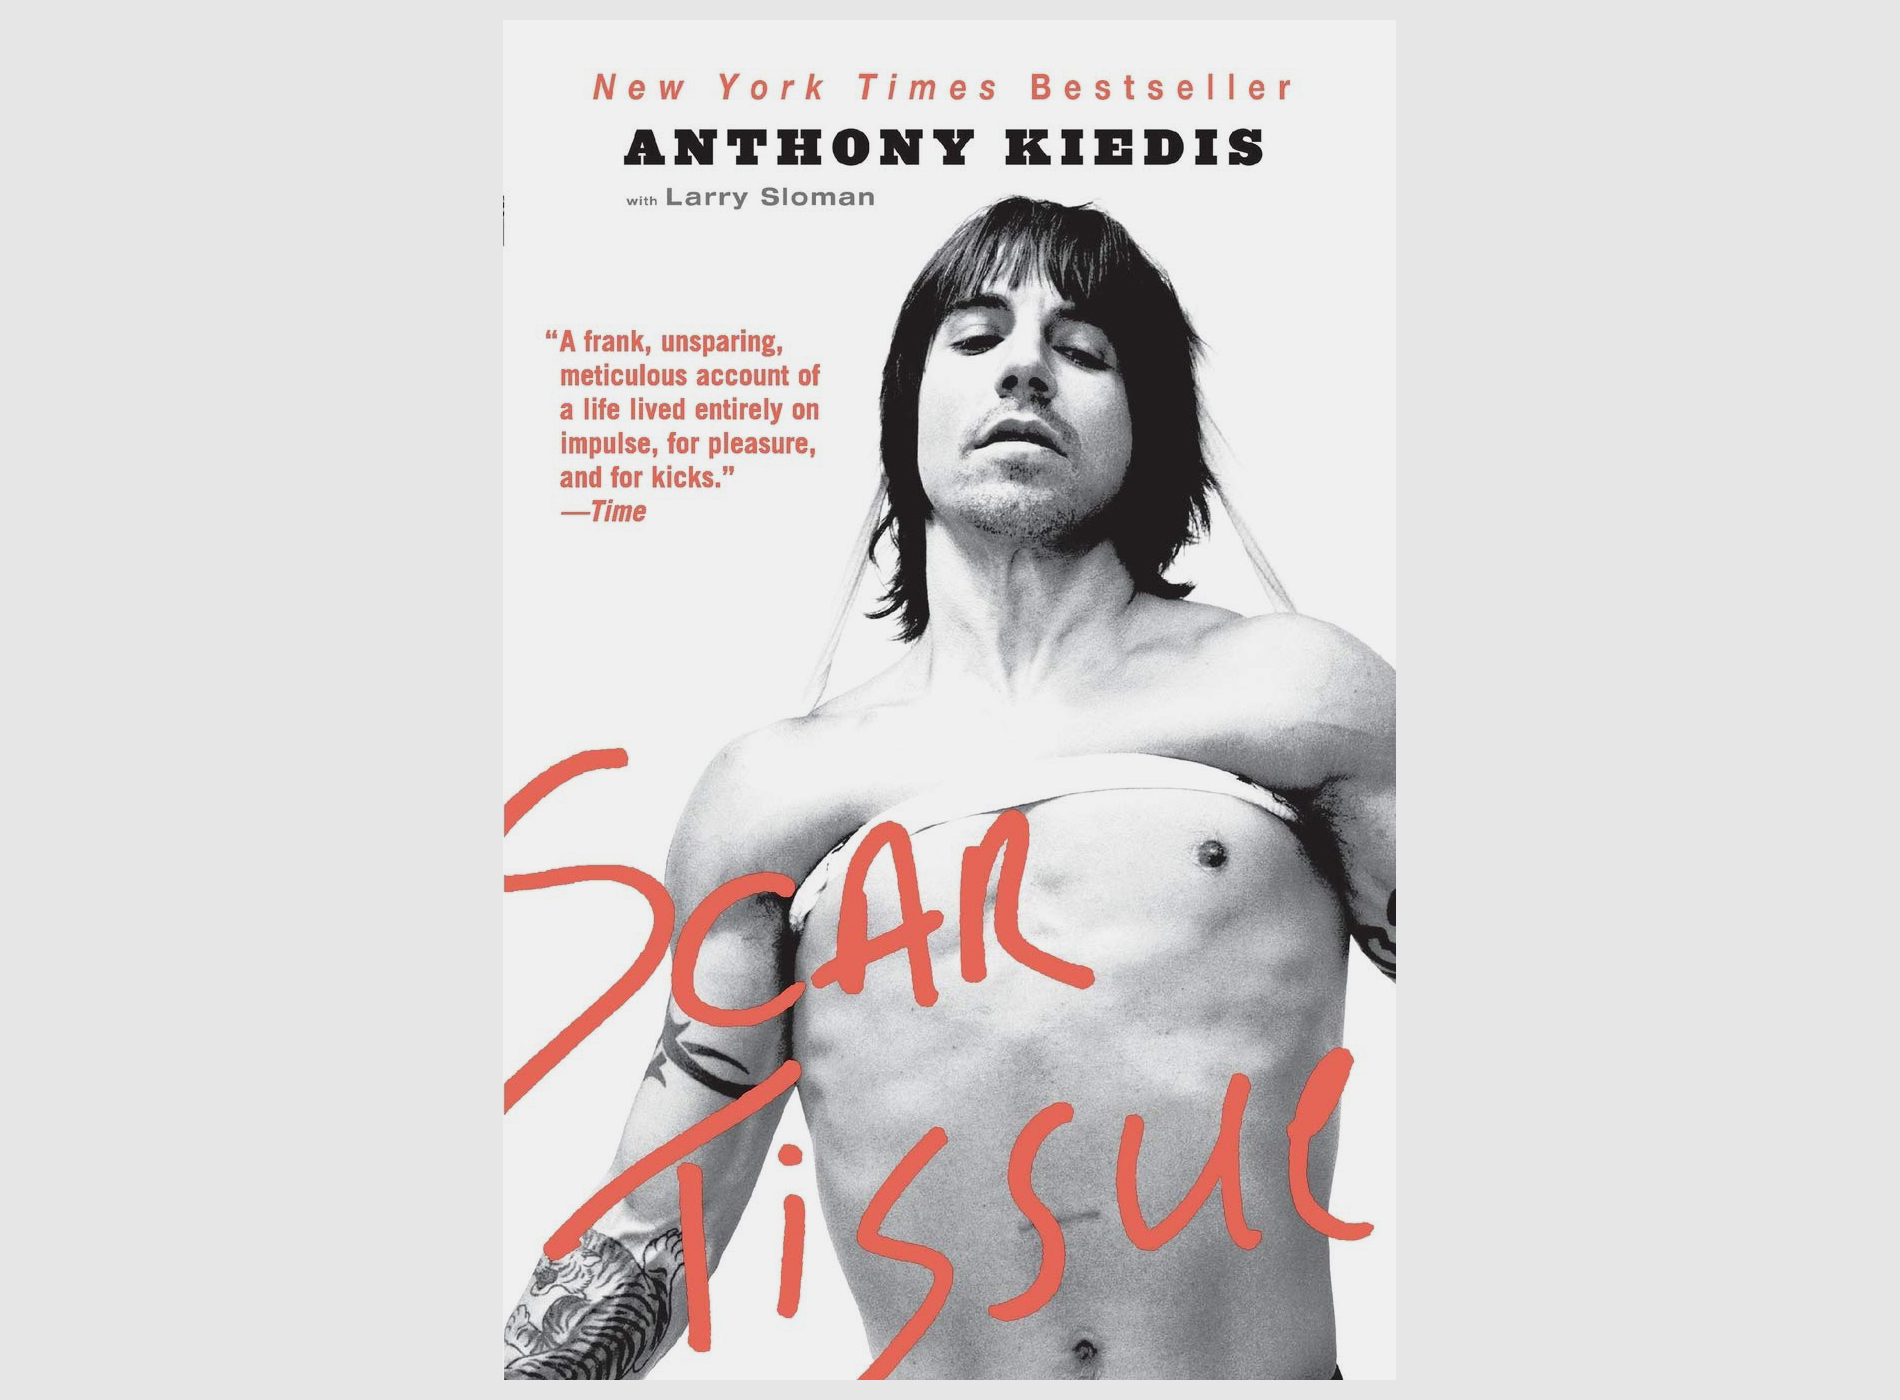 The book cover of "Scar Tissue," the autobiography by Red Hot Chili Peppers singer Anthony Kiedis